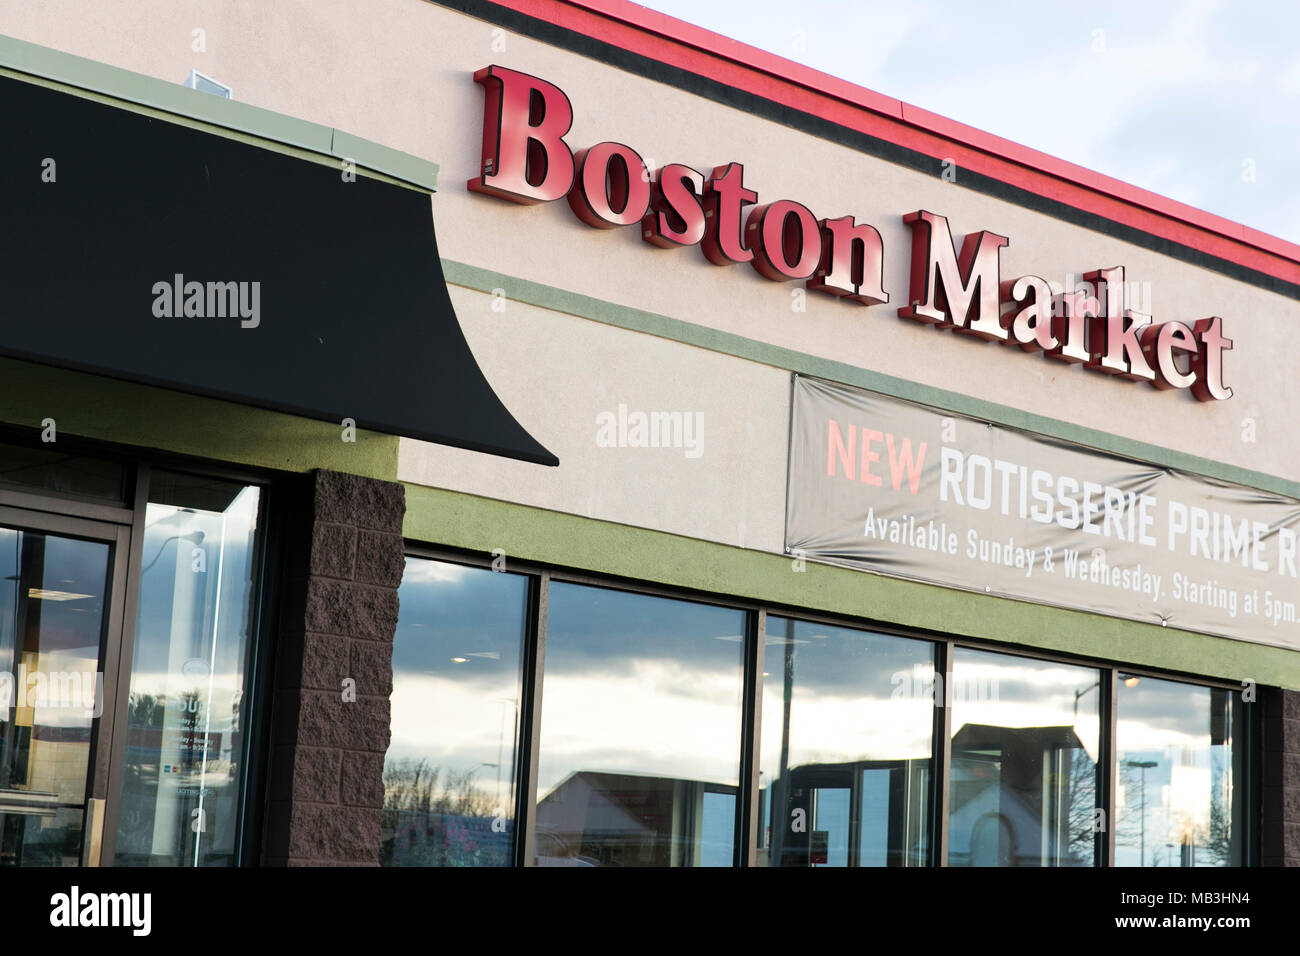 A Boston Market restaurant location in Hagerstown, Maryland on April 5, 2018. Stock Photo